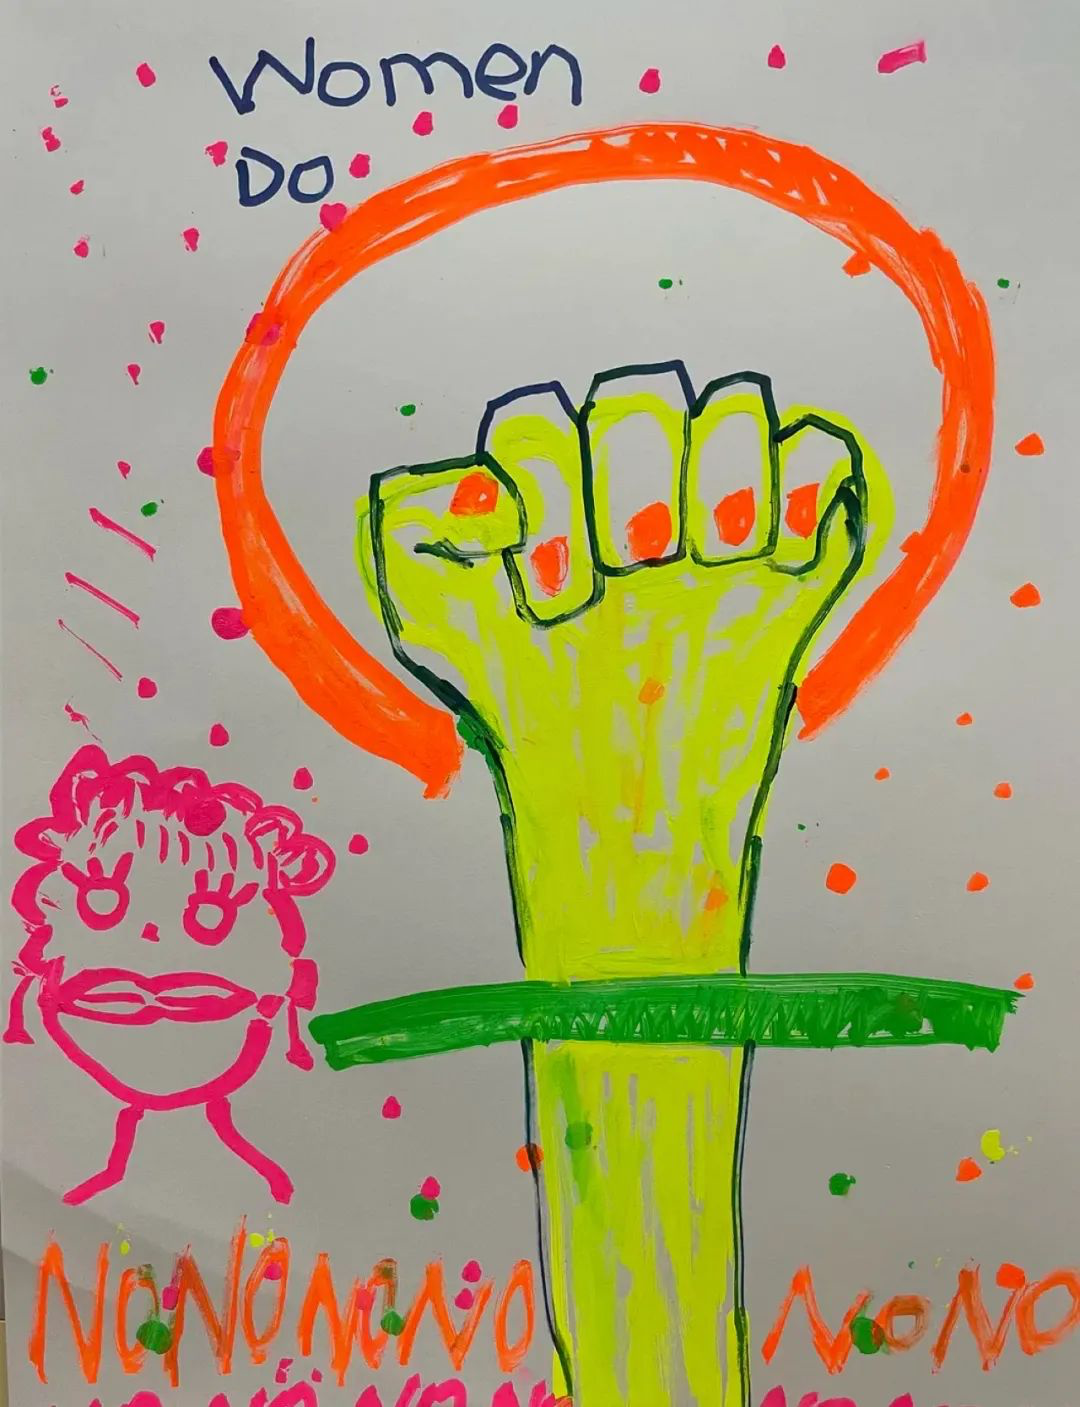 A white poster made with day-glo markers shows crude drawings of a raised fist, a woman’s face, and the English words “Women Do” and “NoNoNoNoNoNo,” at the top and bottom of the poster, respectively. 